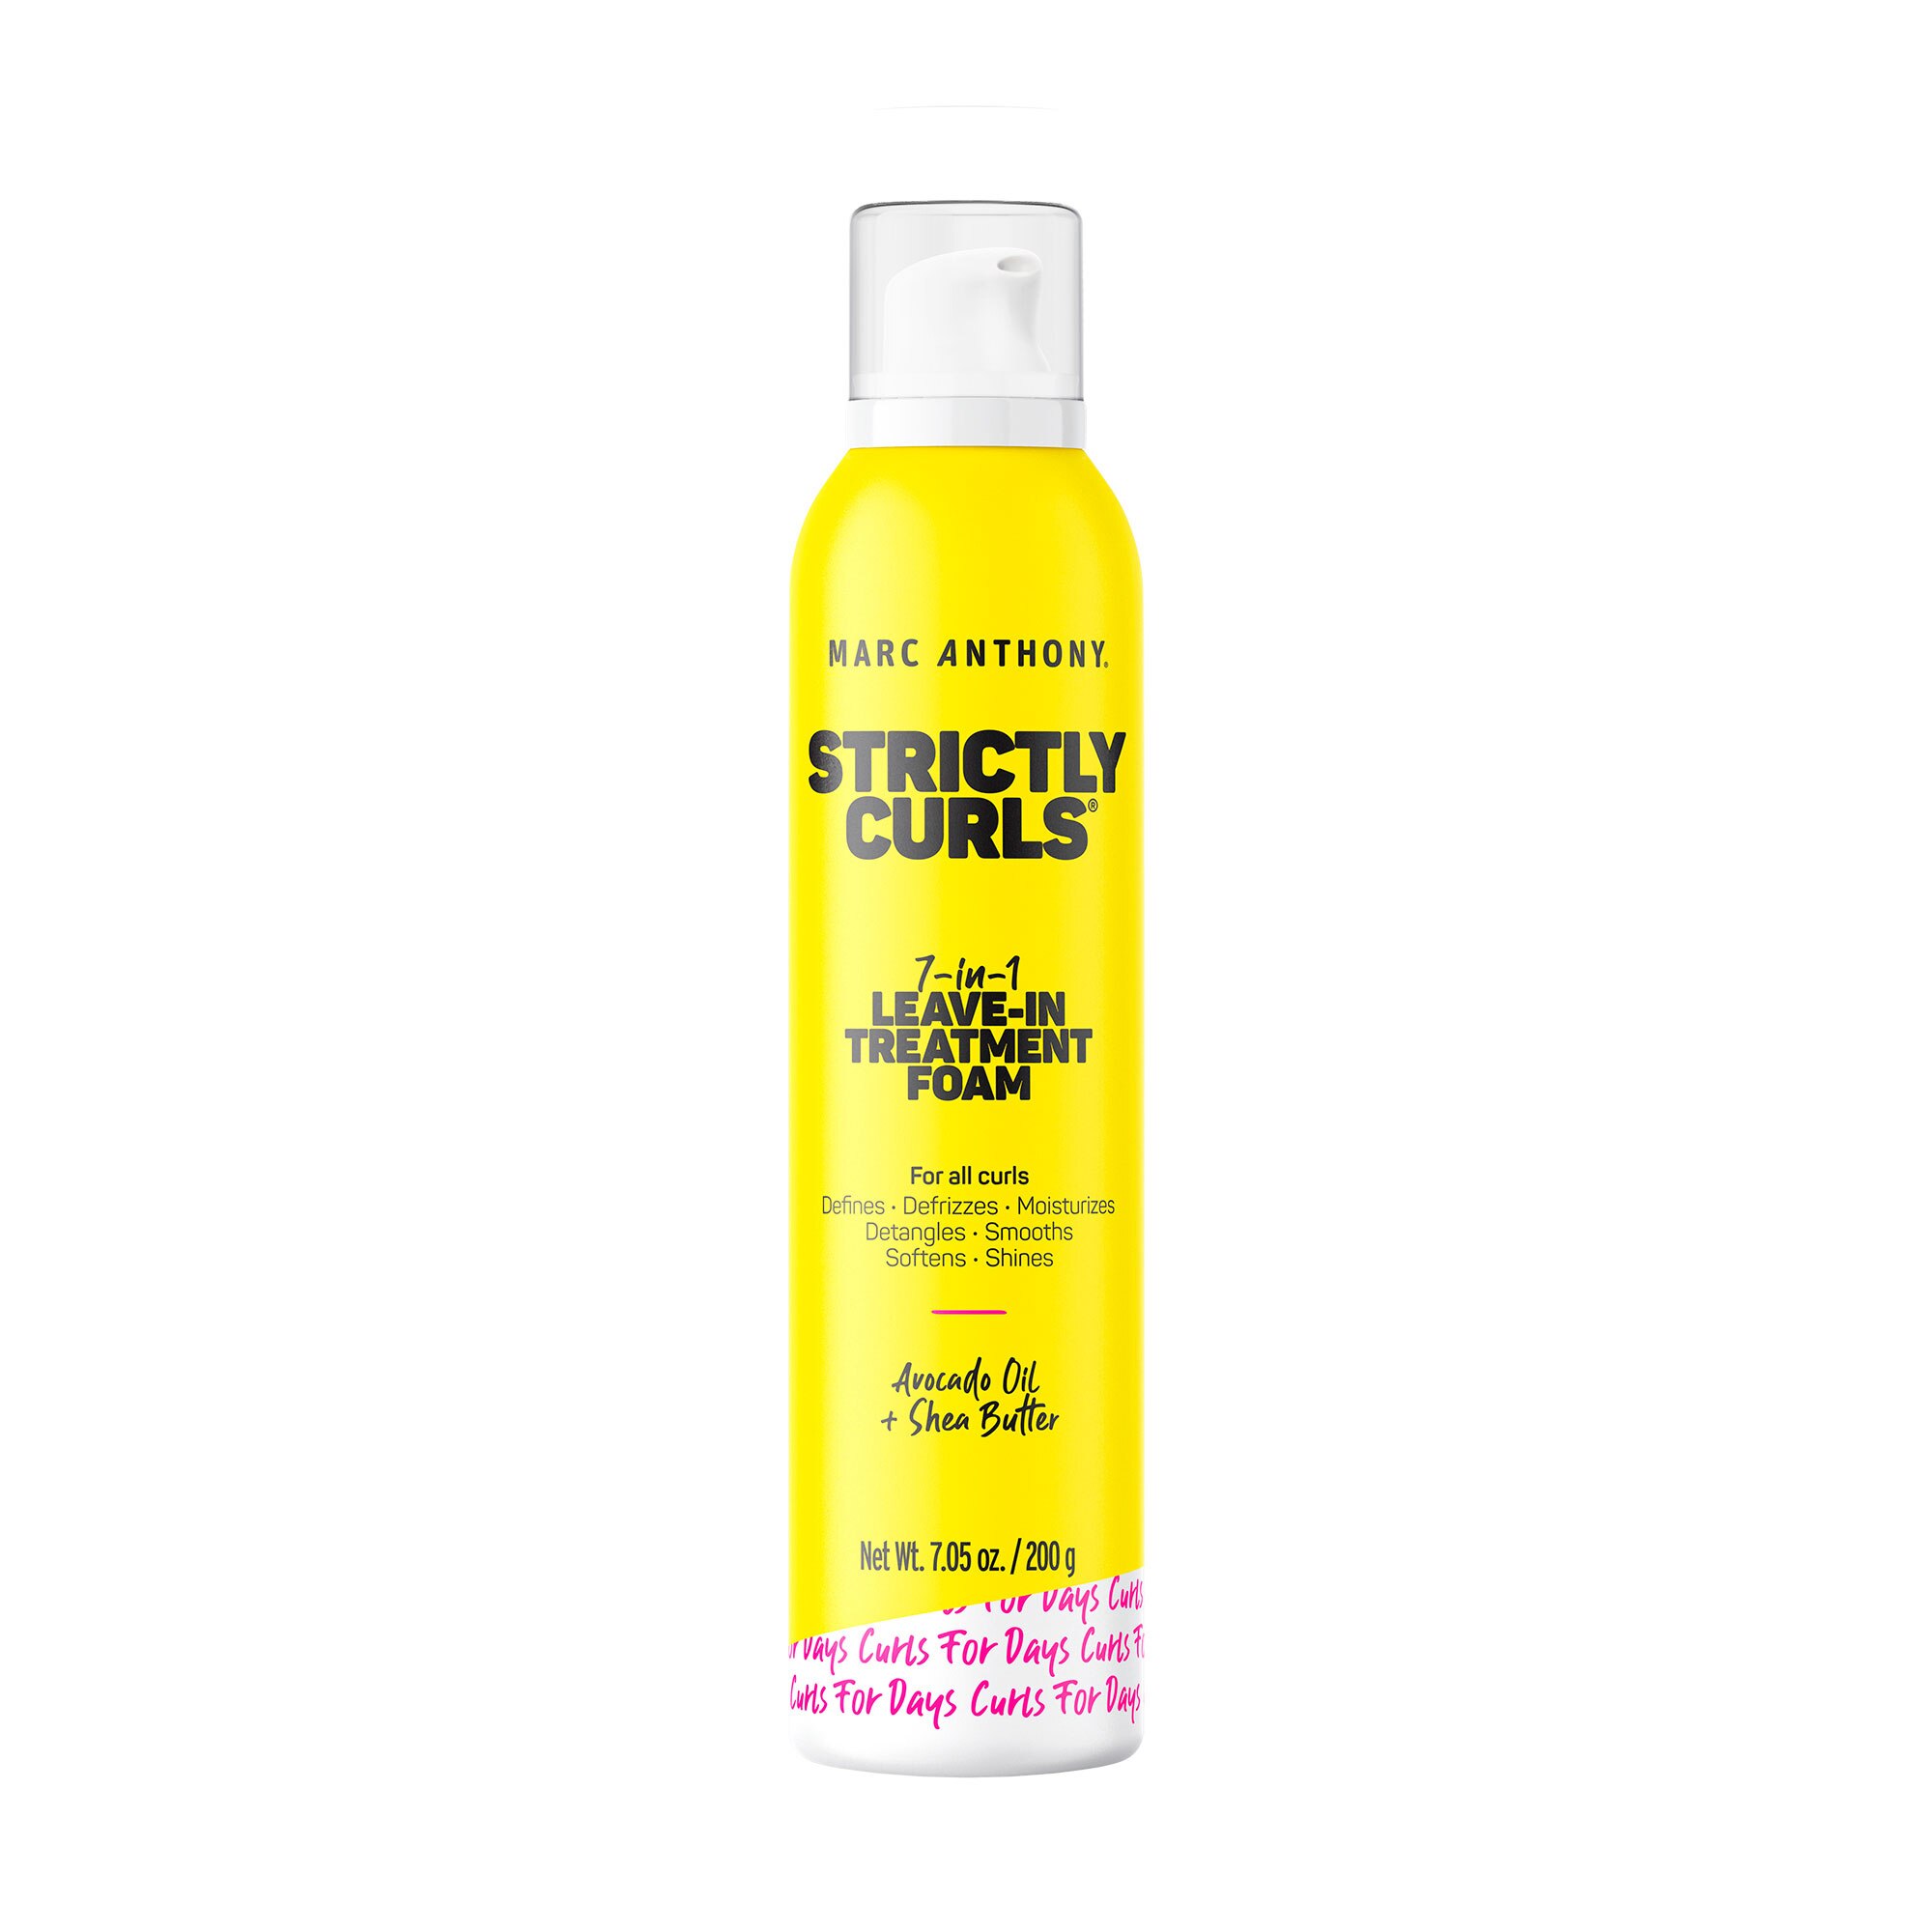 Marc Anthony Strictly Curls 7-in-1 Leave-In Treatment Foam, 8.4 OZ